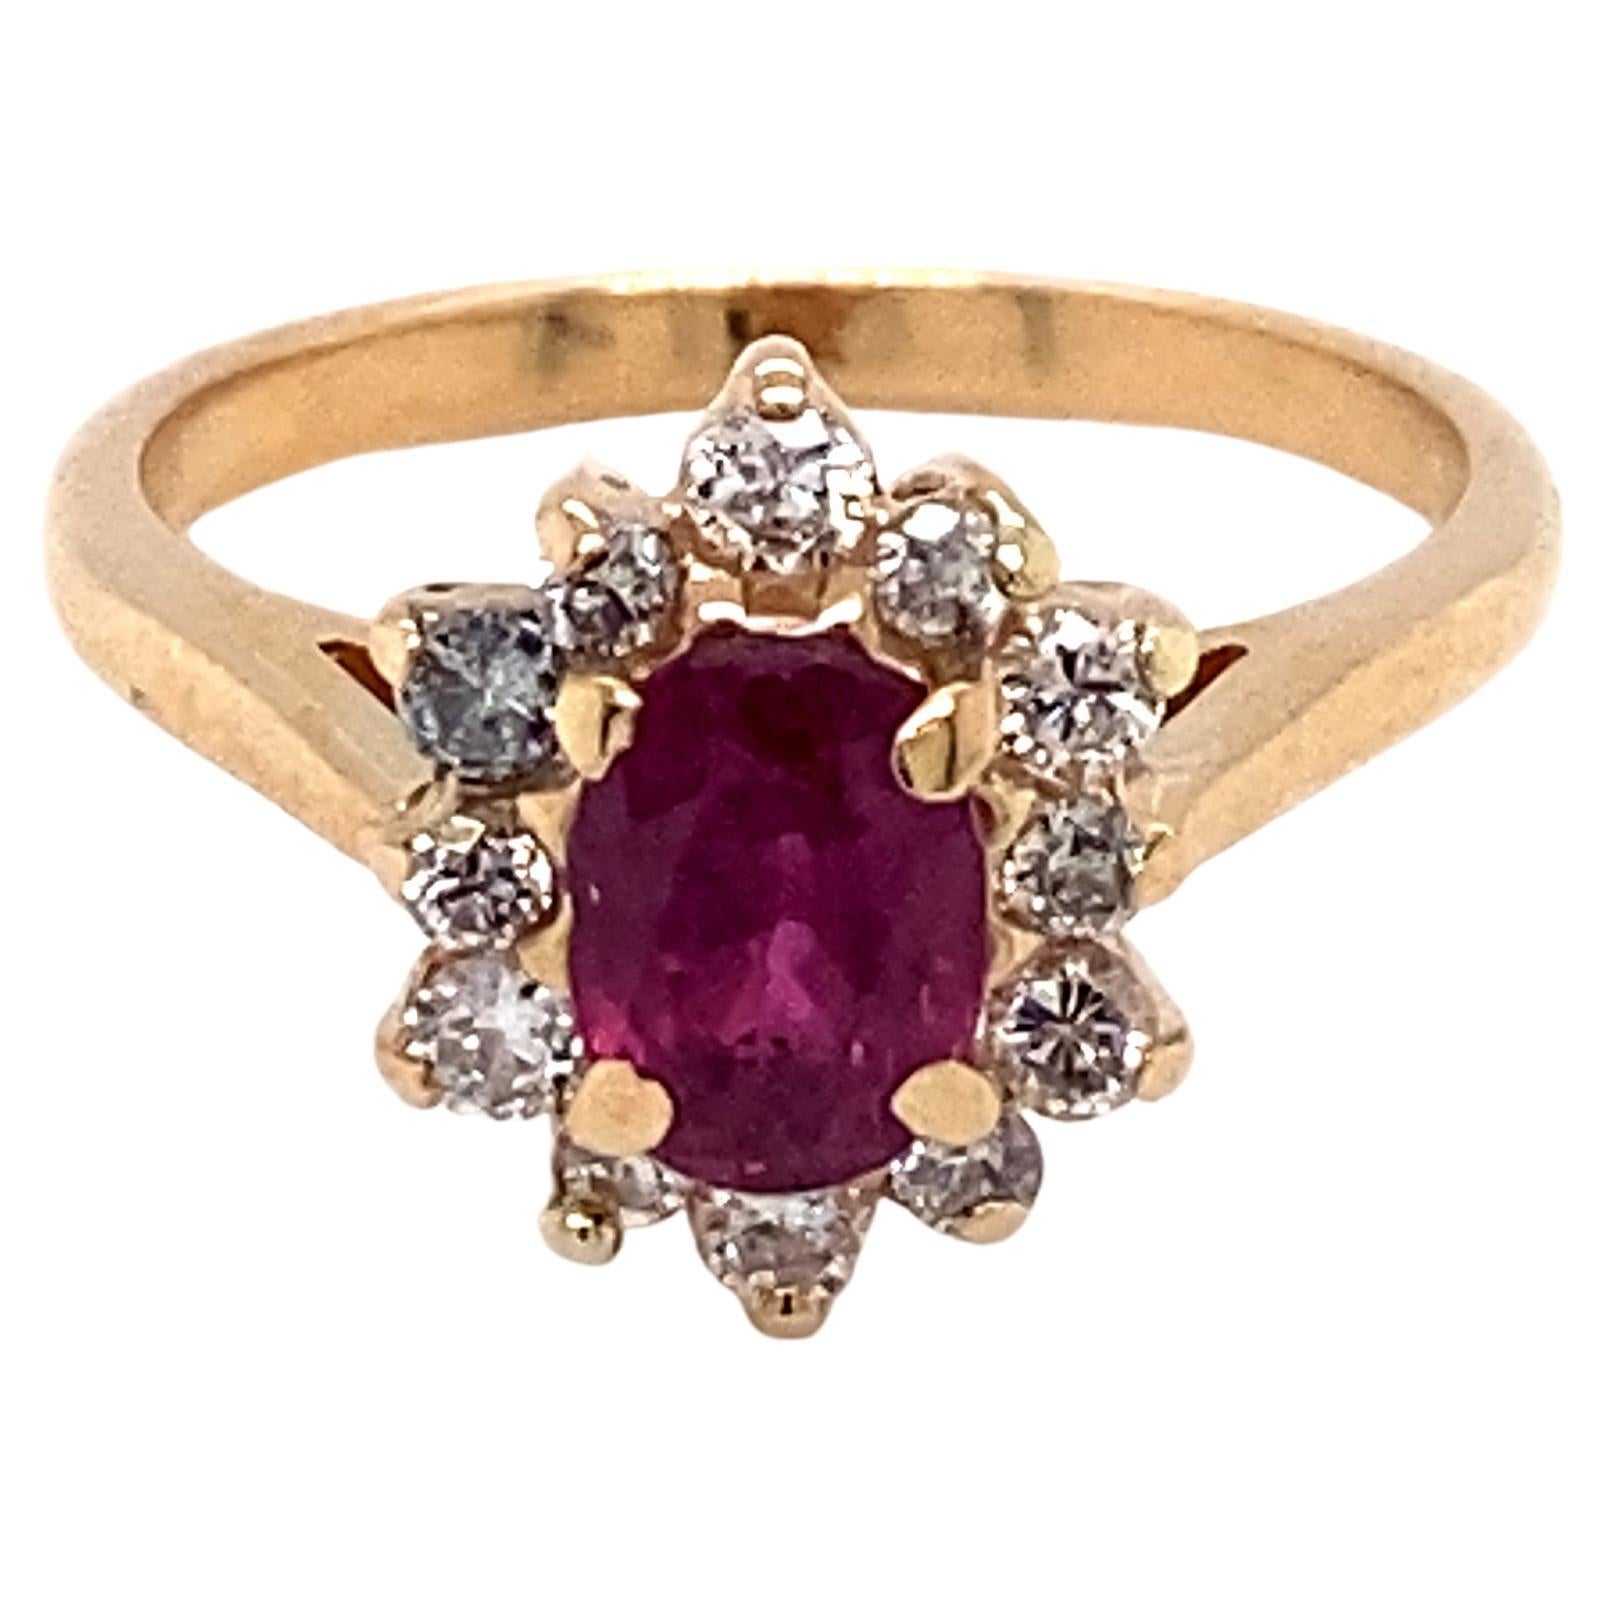 1 Carat Oval Ruby and Diamond Ring in 14 Karat Gold